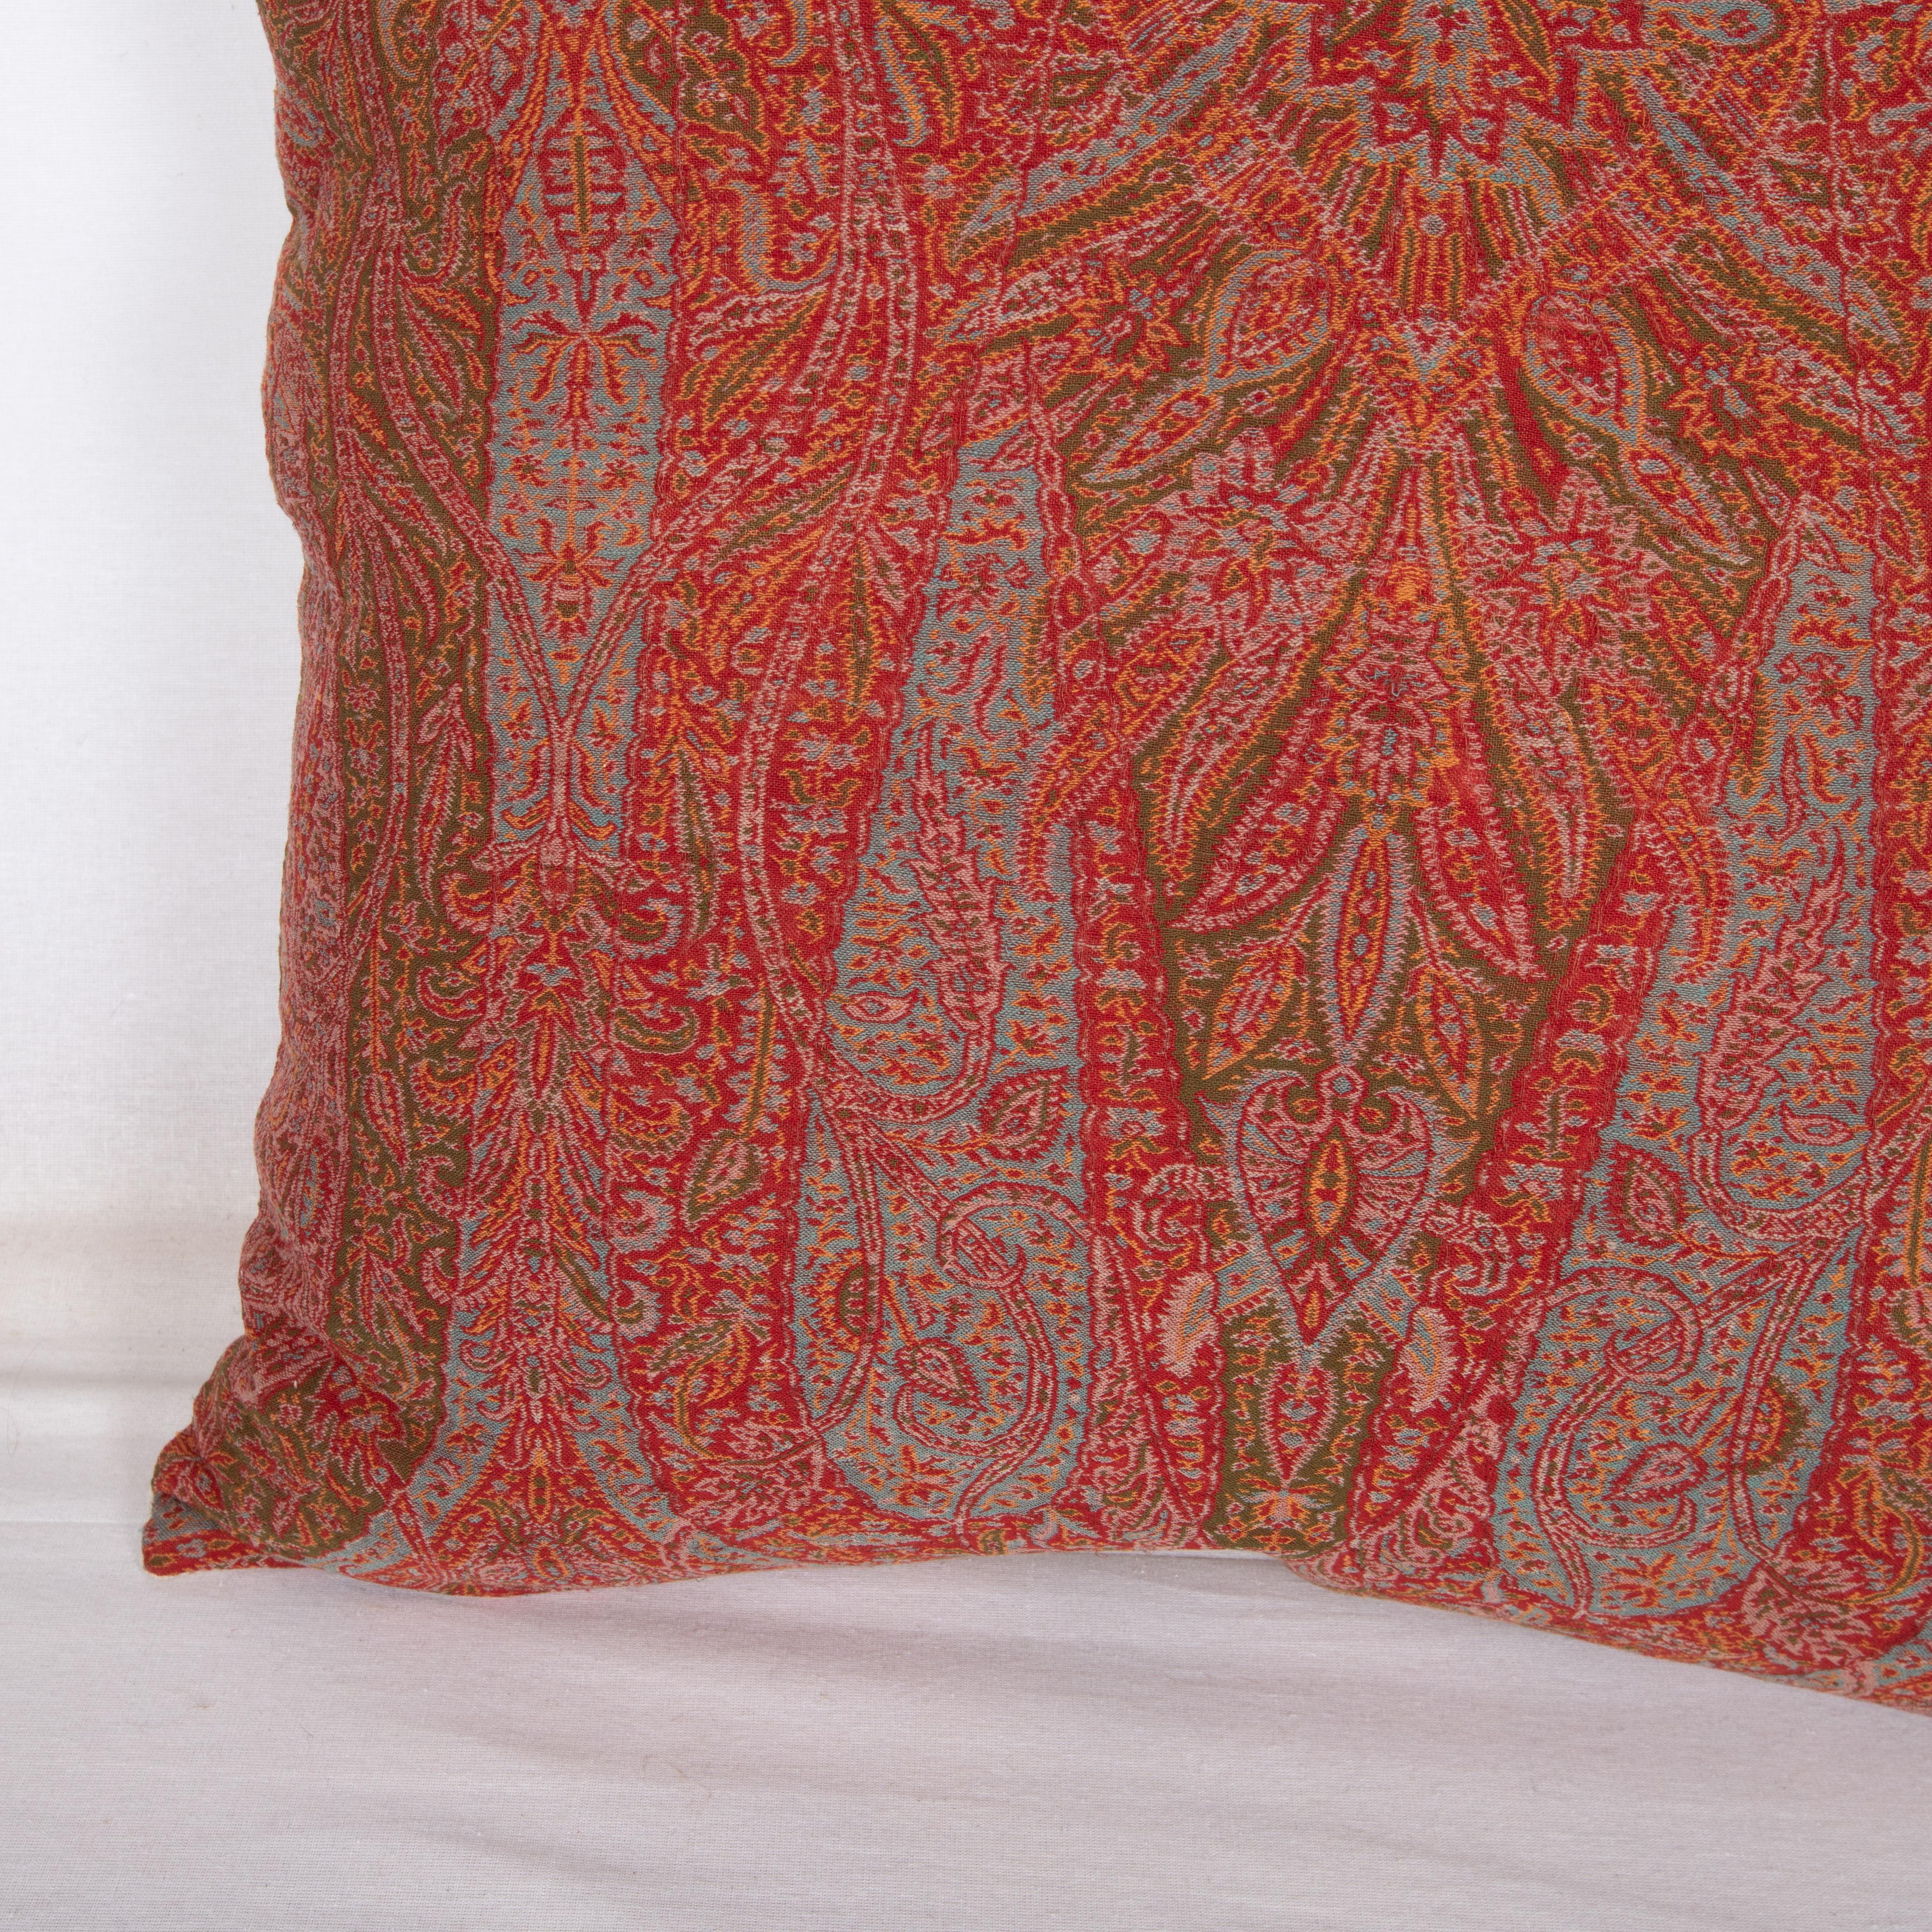 Woven Antique Pillow Cover made from a European Wool Paisley Shawl, L 19th/ E.20th C For Sale